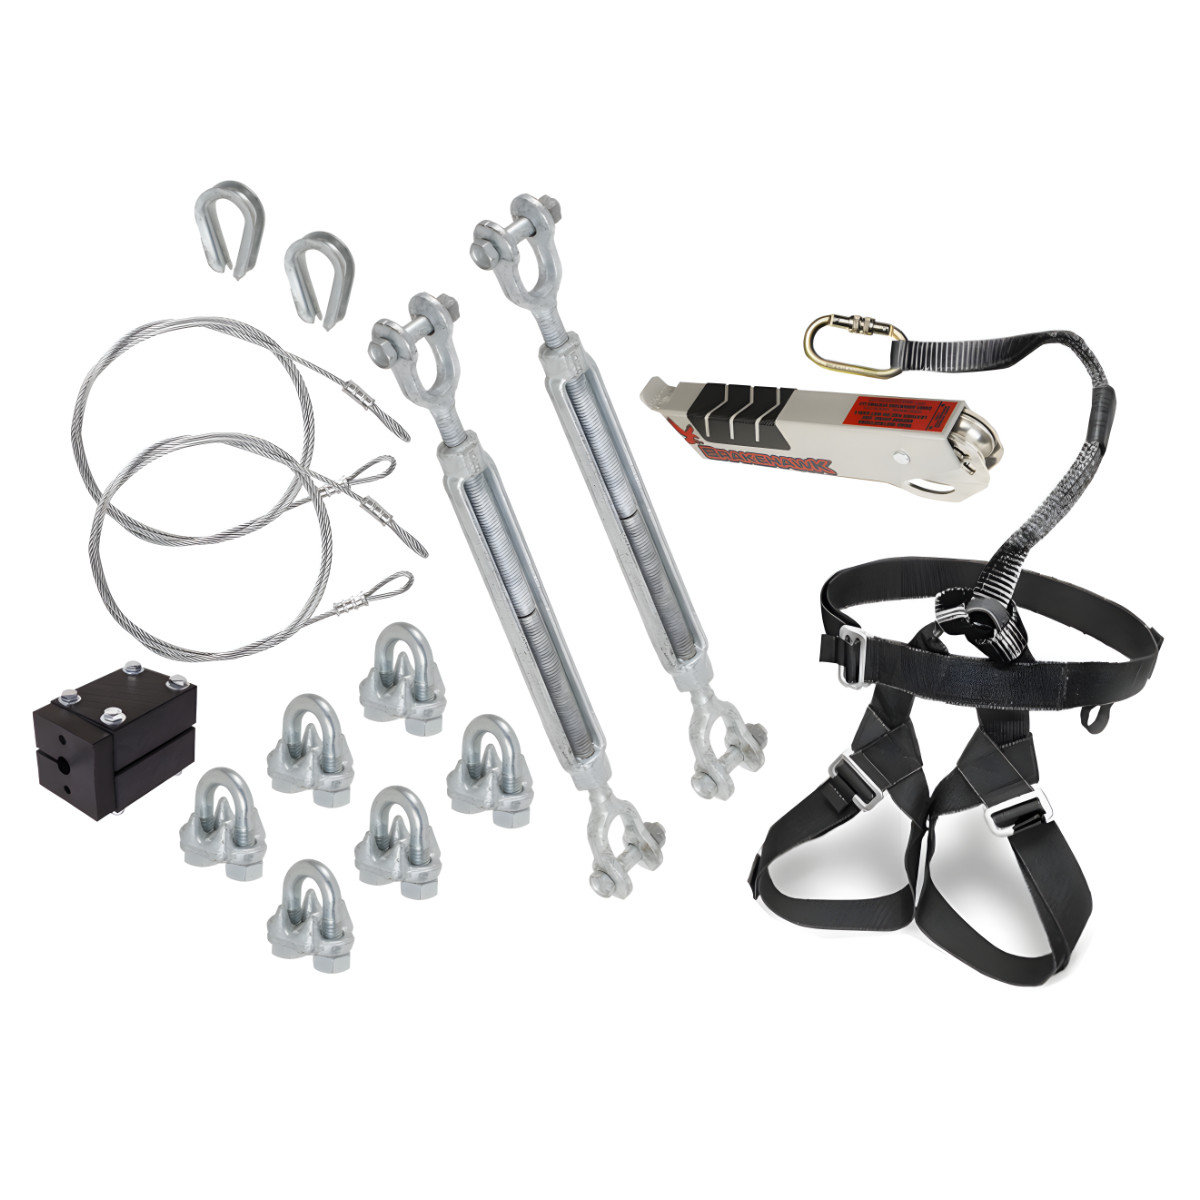 Junior Zip Line Brake Kit Unique Adjustable Length and Strength Made in England 